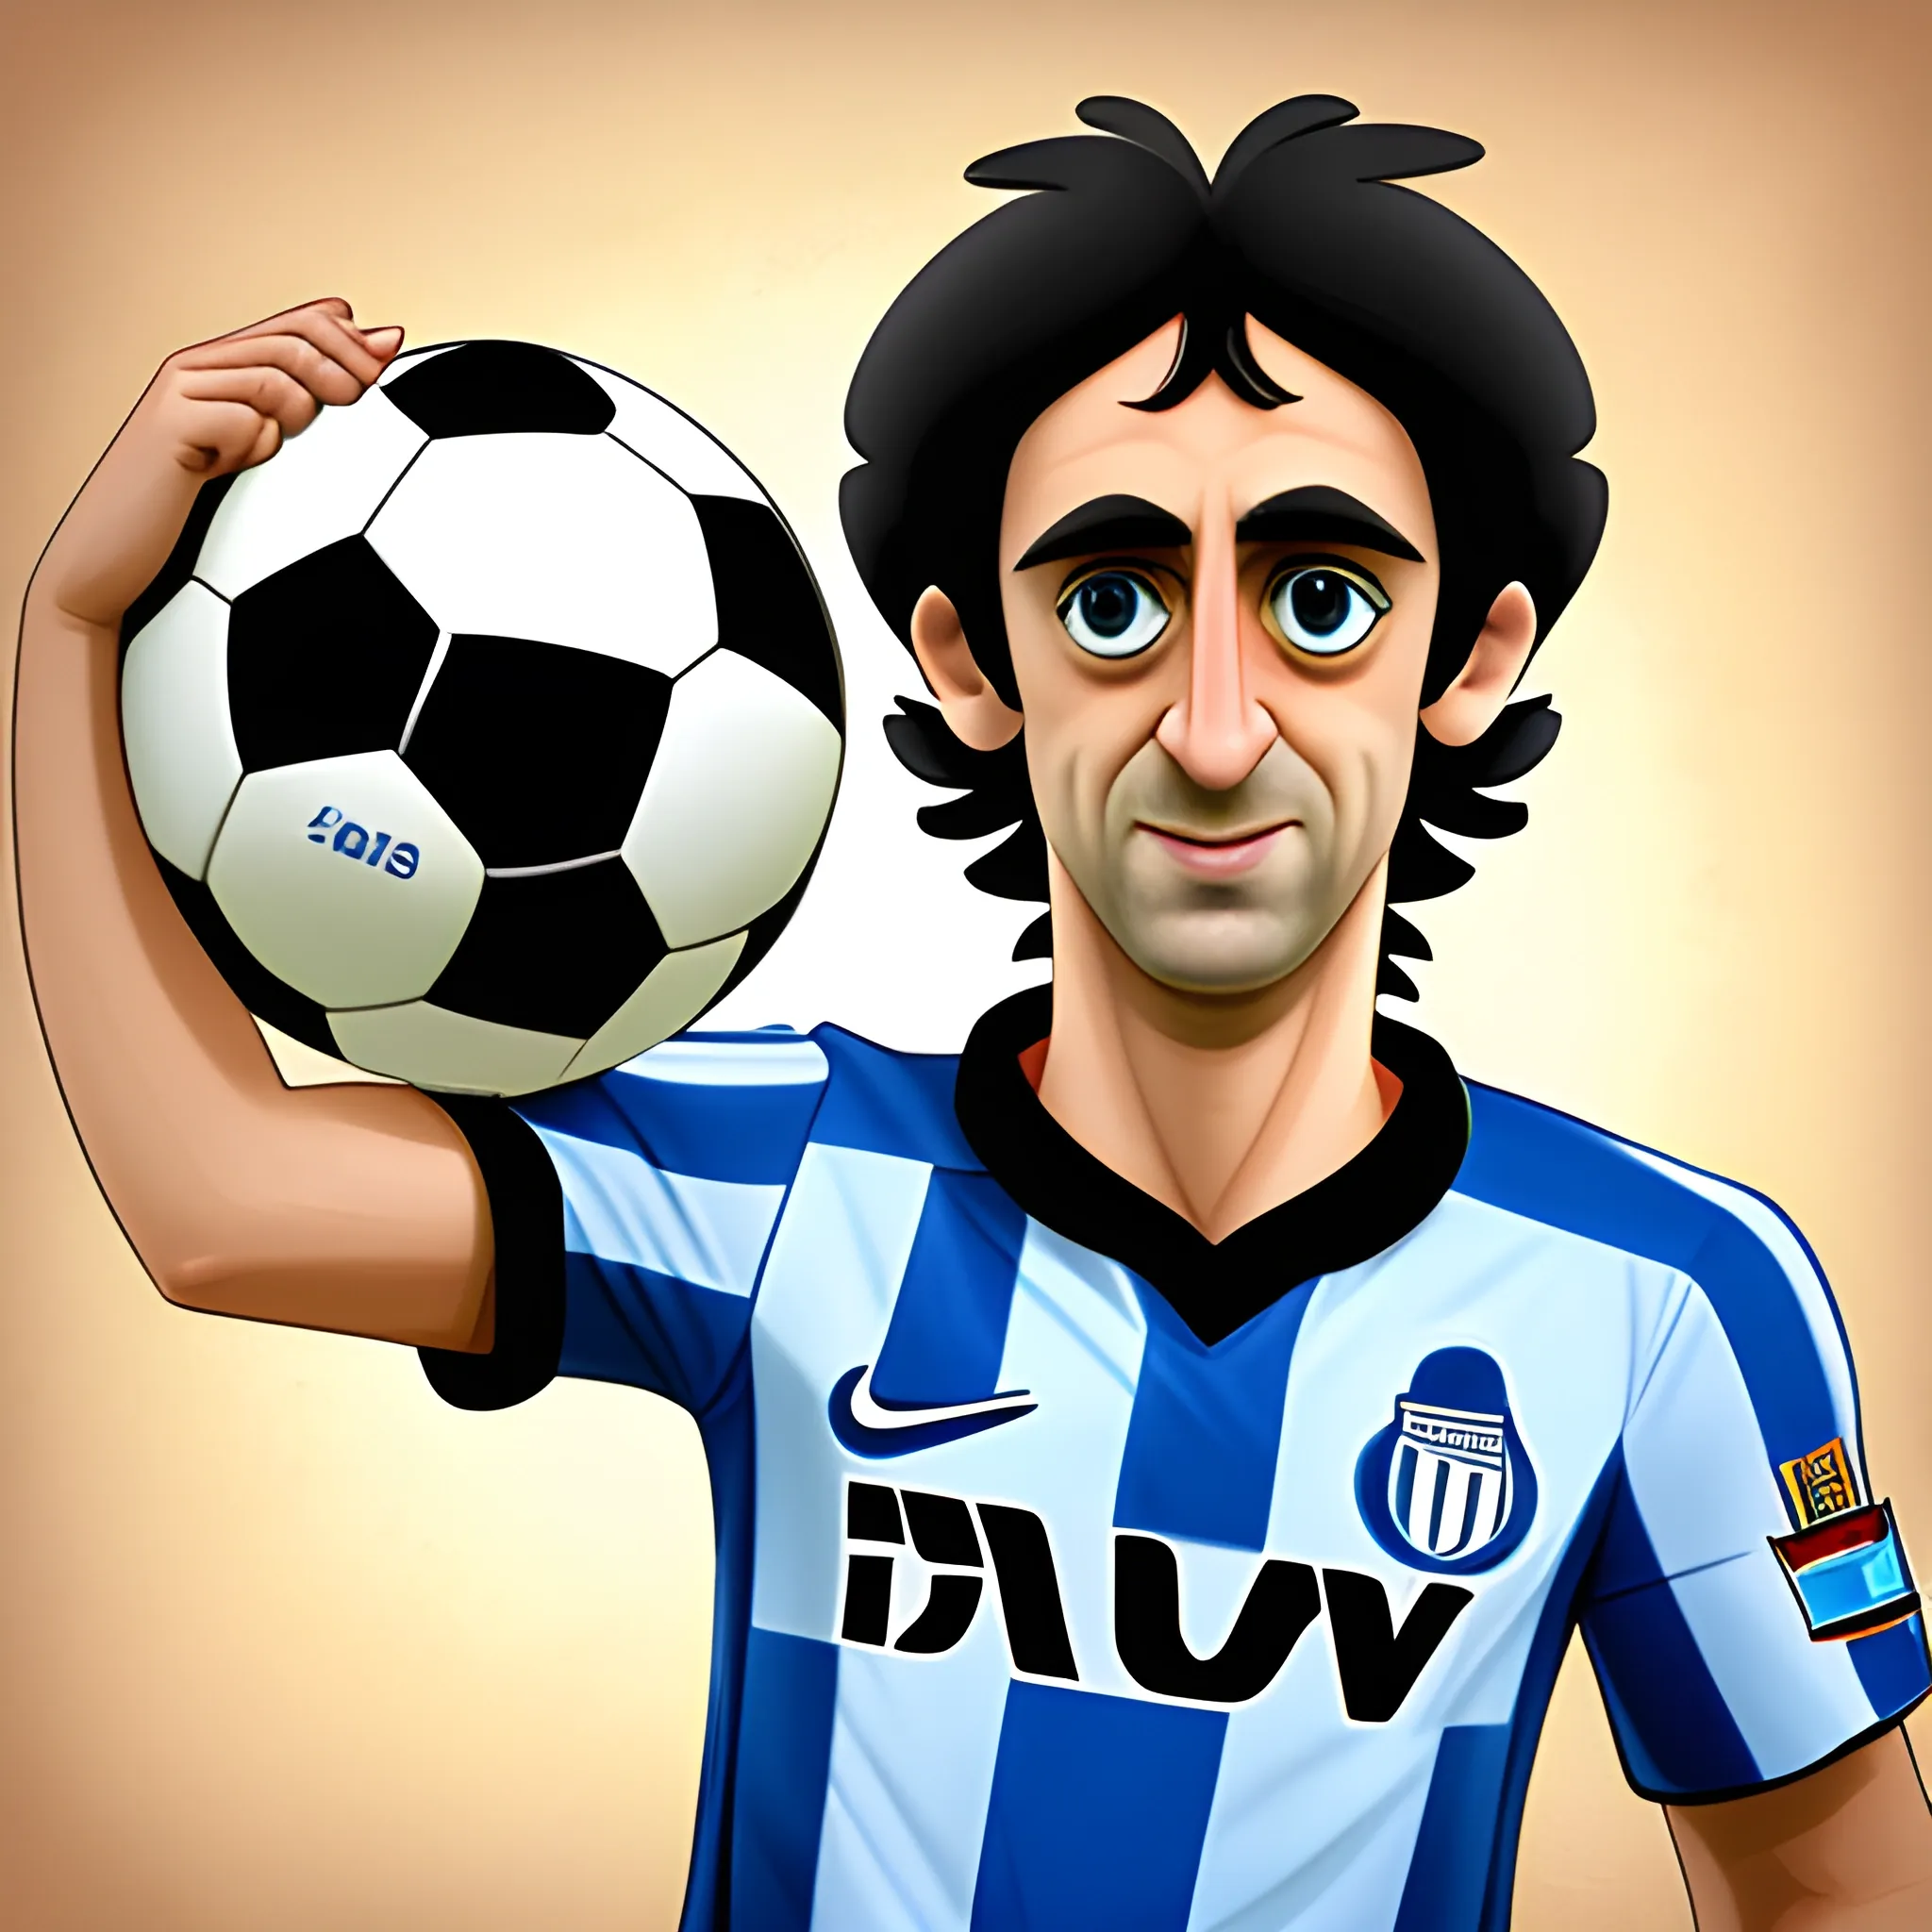 Character, soccer ballon, Diego Milito face. Toon style